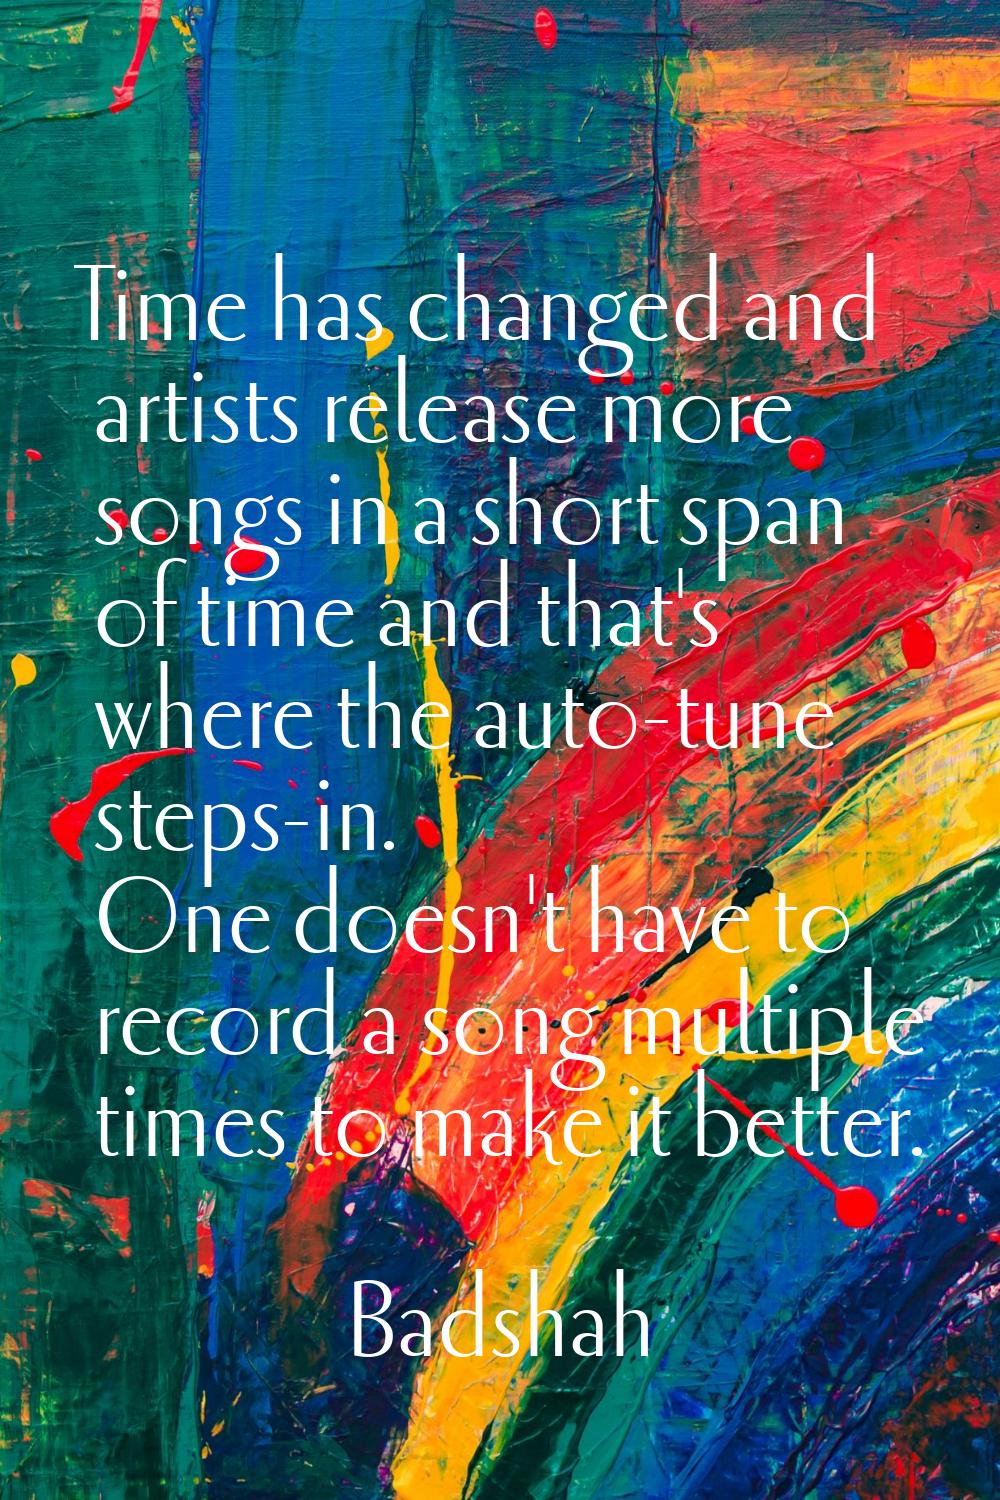 Time has changed and artists release more songs in a short span of time and that's where the auto-t